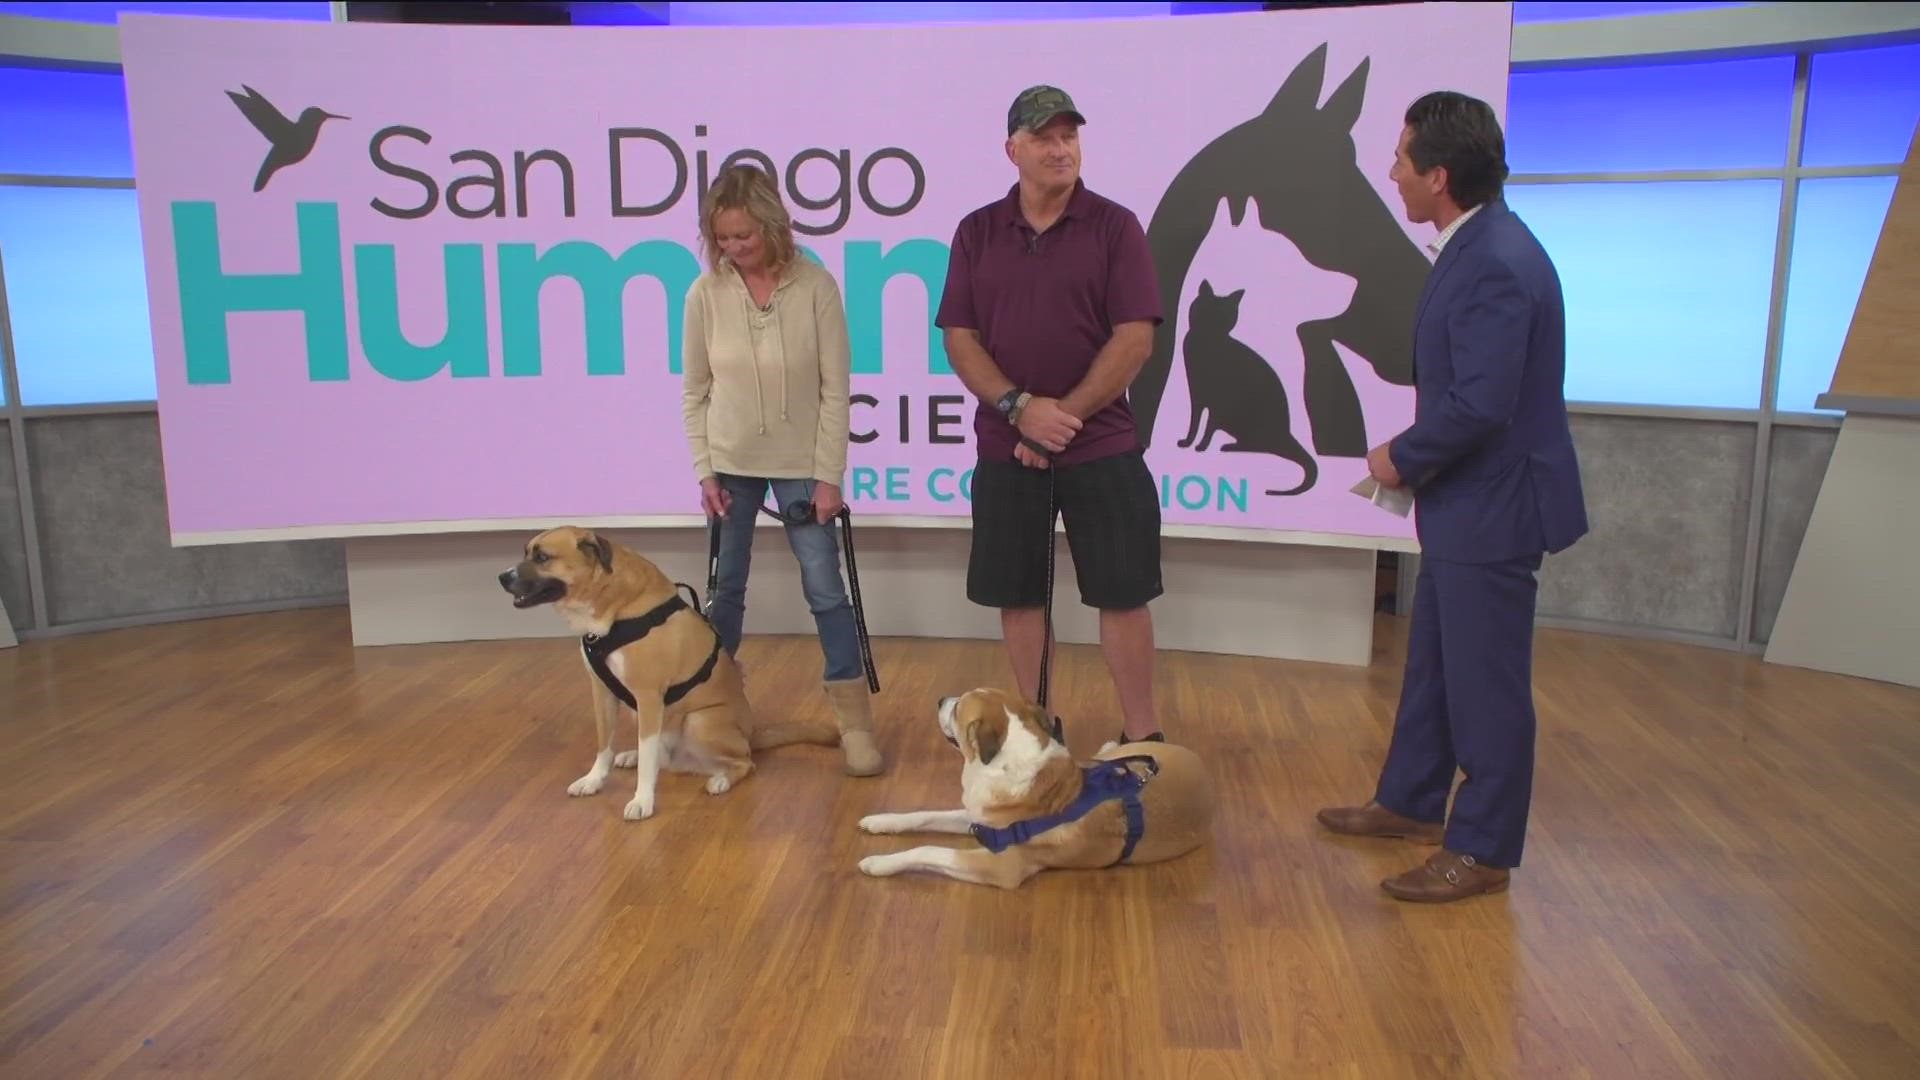 The dogs were adopted after they appeared on CBS 8 and the CW.